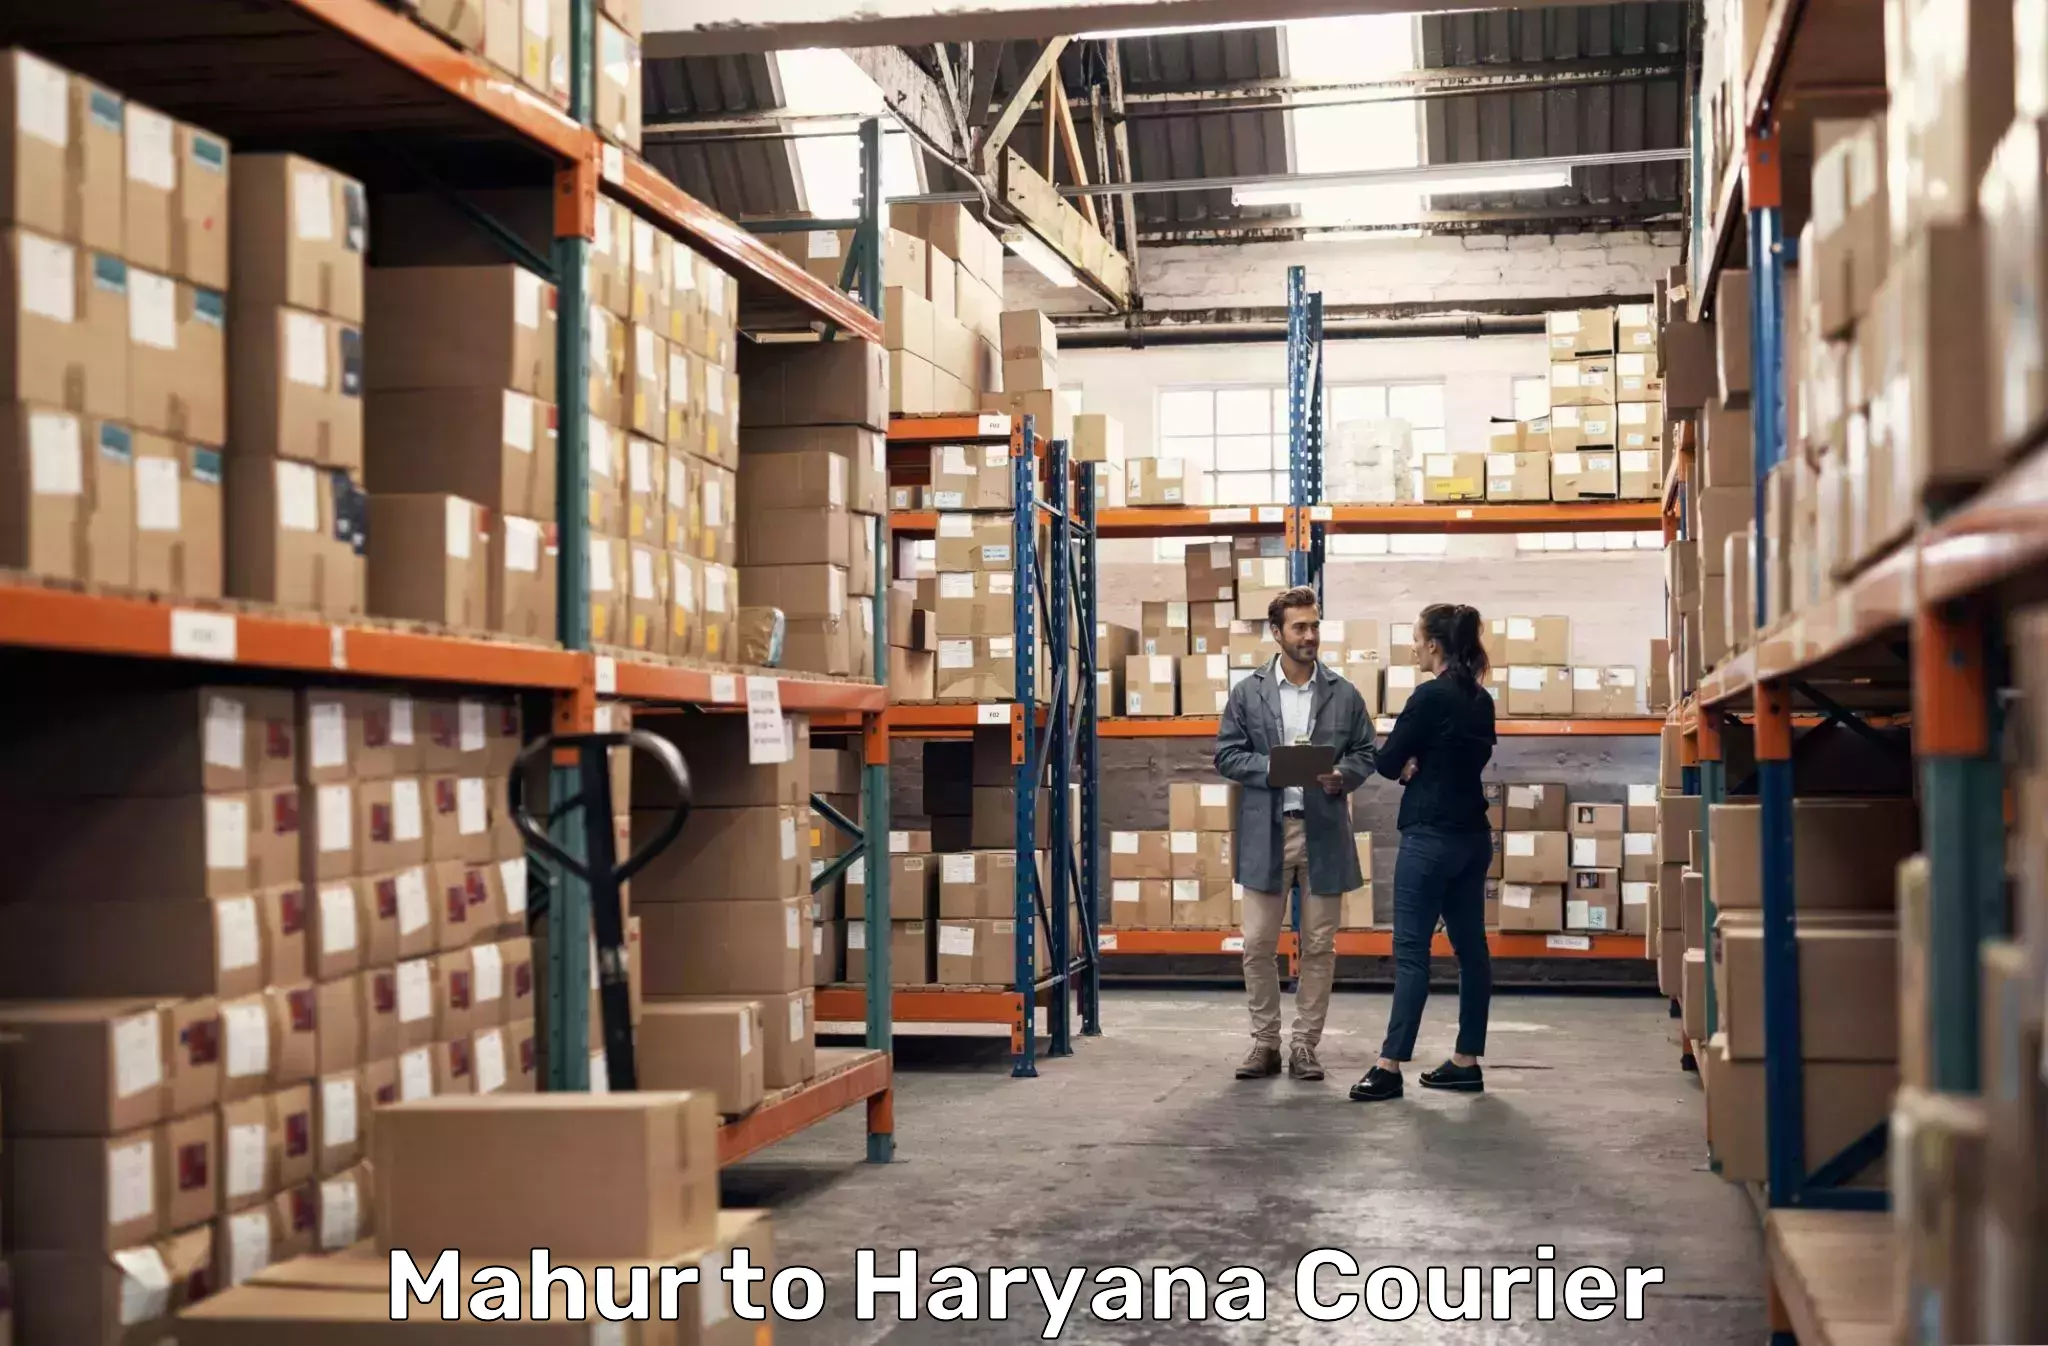 Ocean freight courier Mahur to Chaudhary Charan Singh Haryana Agricultural University Hisar